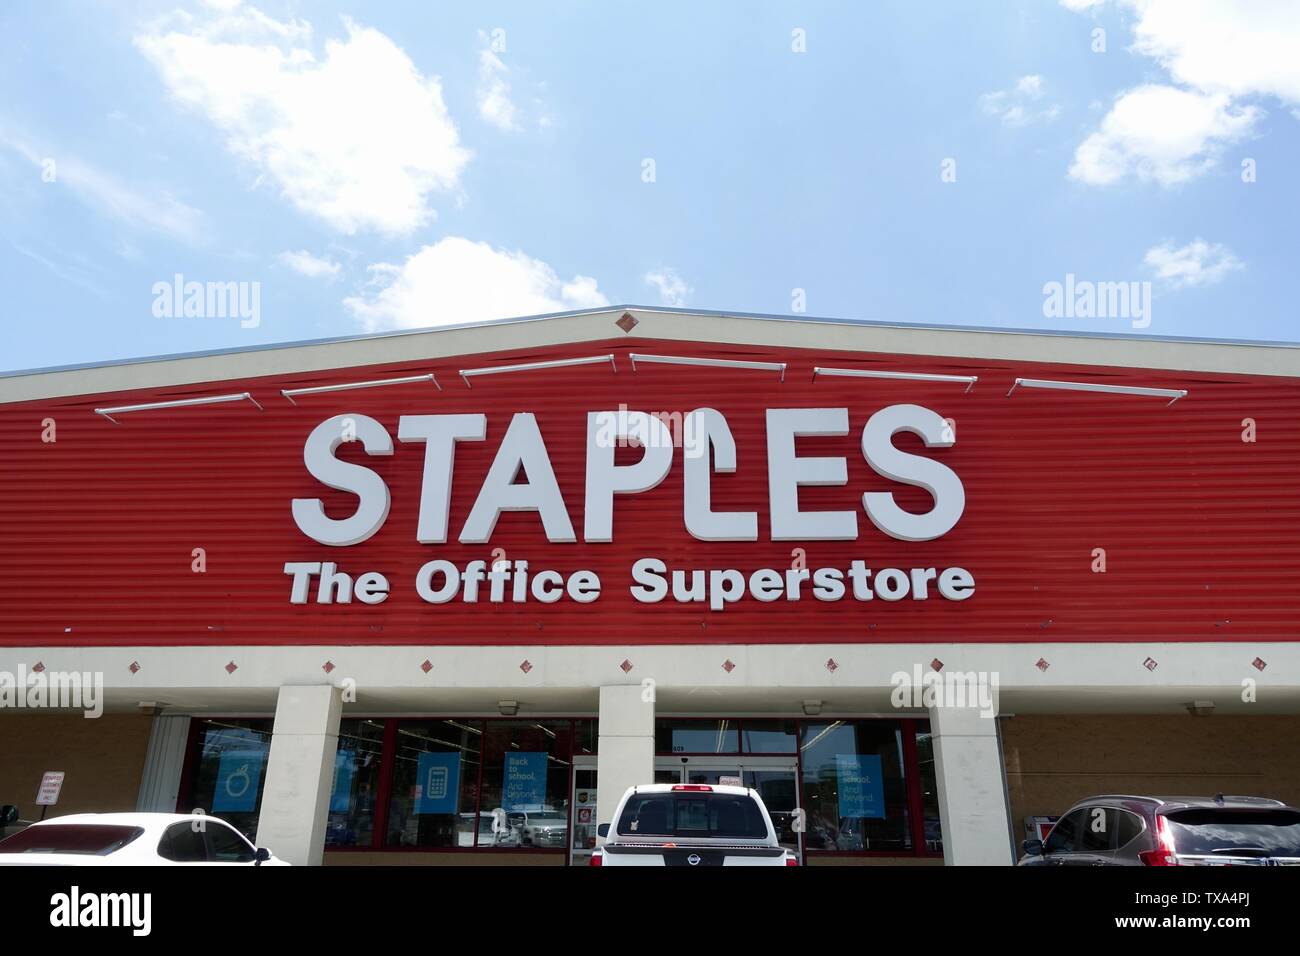 Ft. Pierce,FL/USA-6/23/19: An exterior view of a staples store. Staples Inc. is a Massachusetts-based office supplies and products retail company. Stock Photo